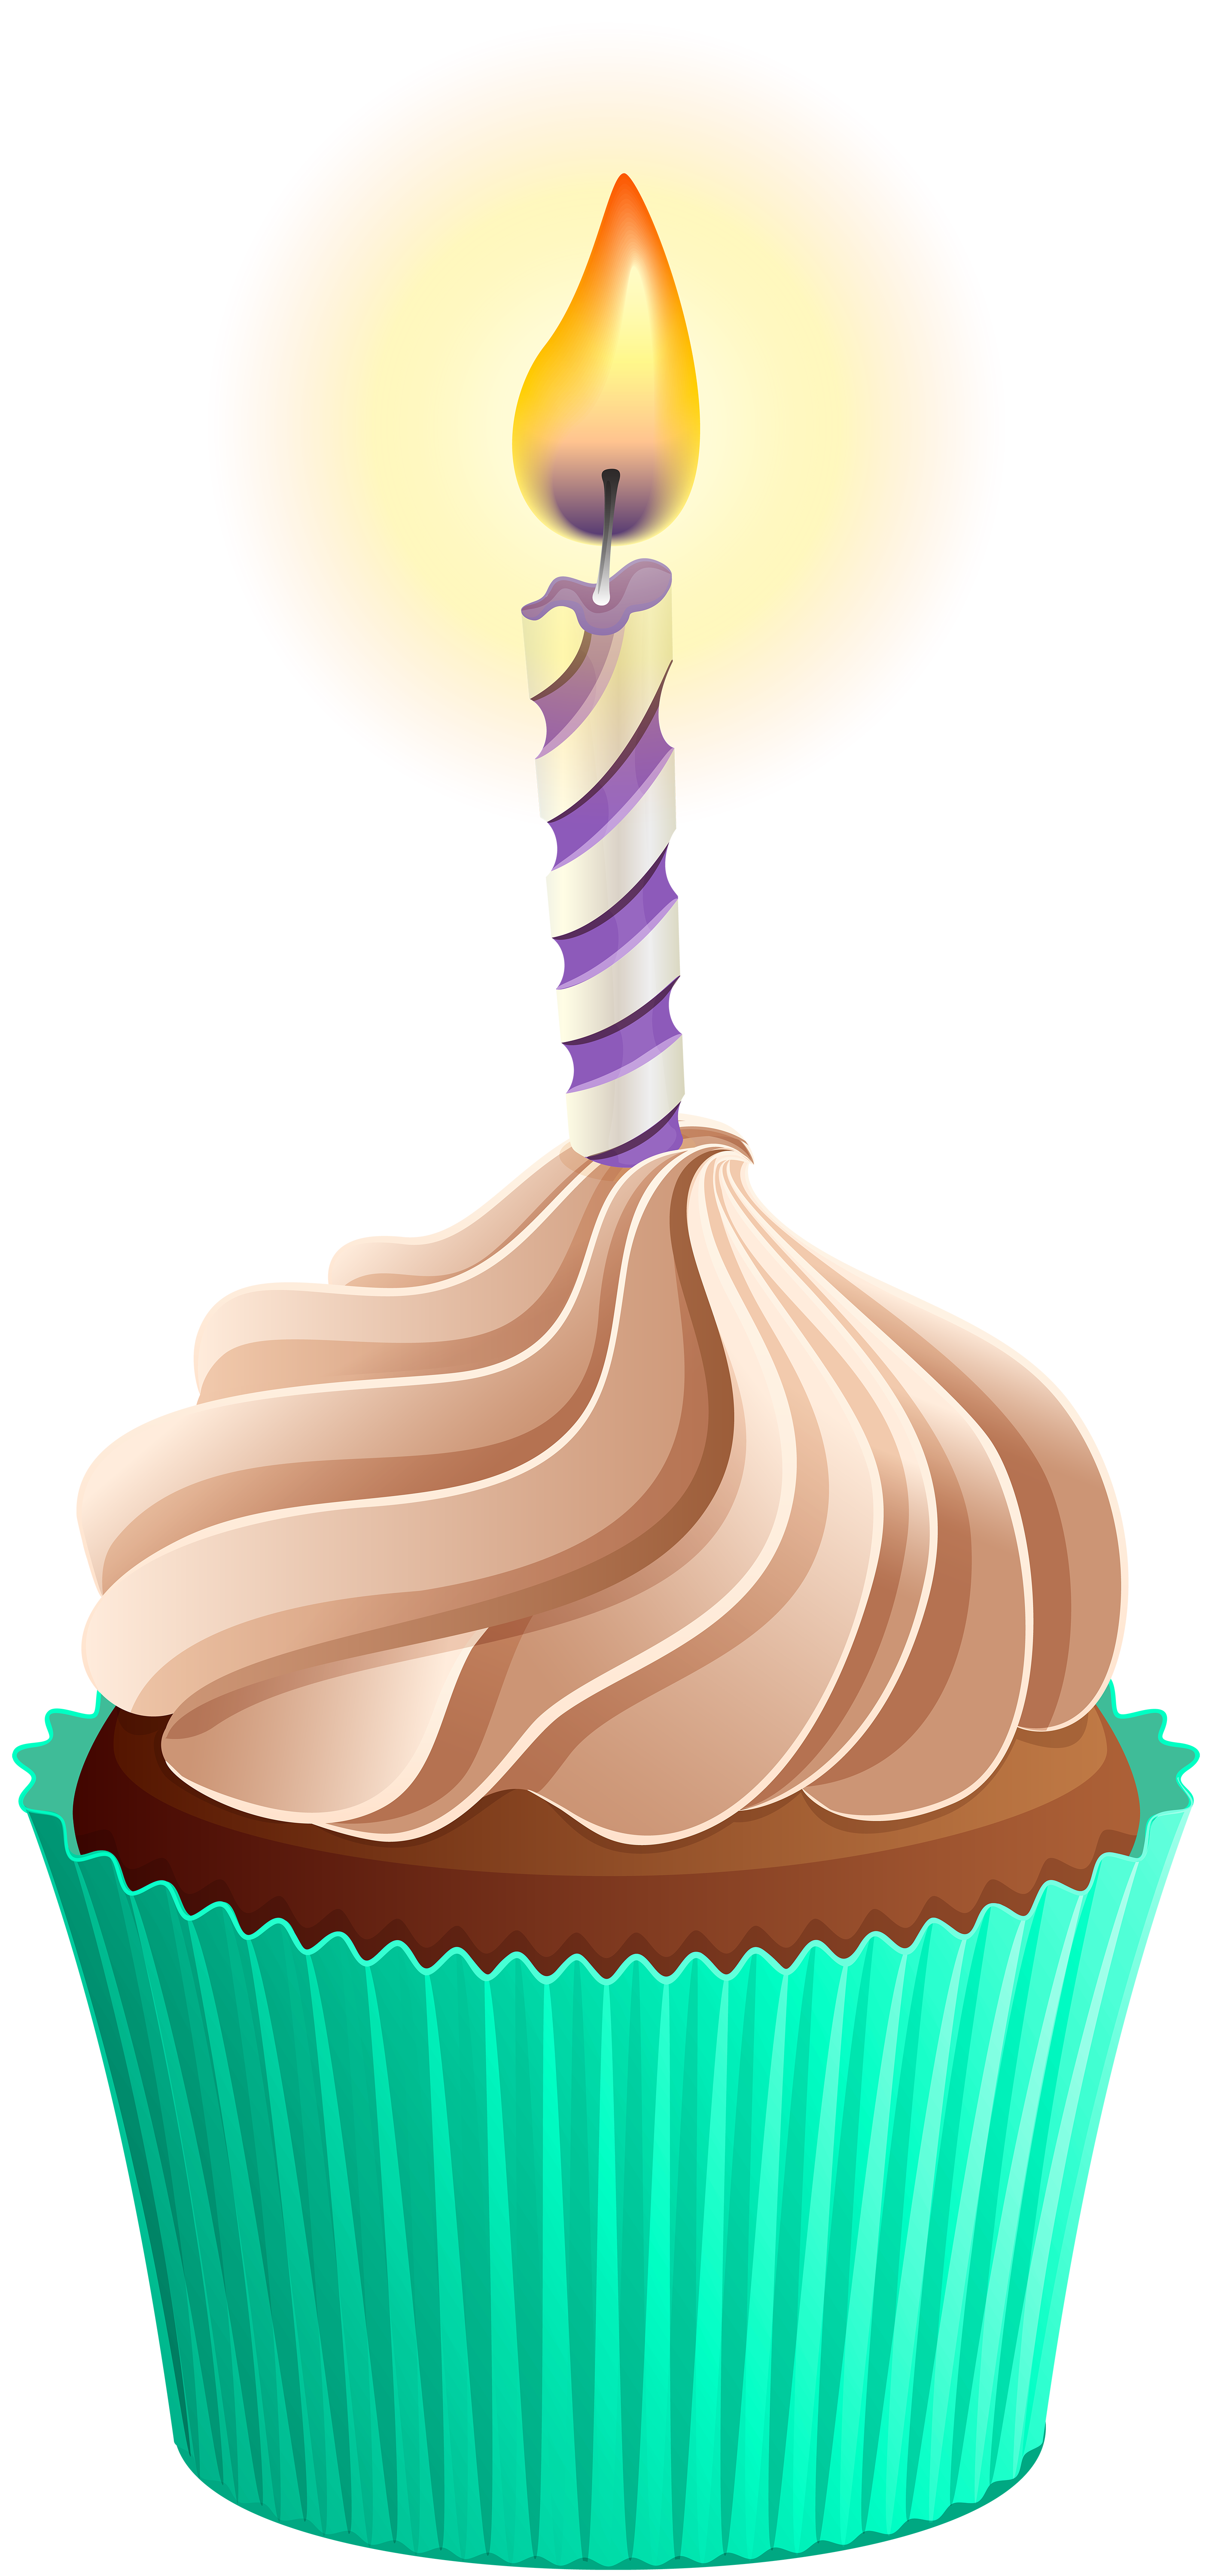 Clipart cupcake banner. Birthday png clip art